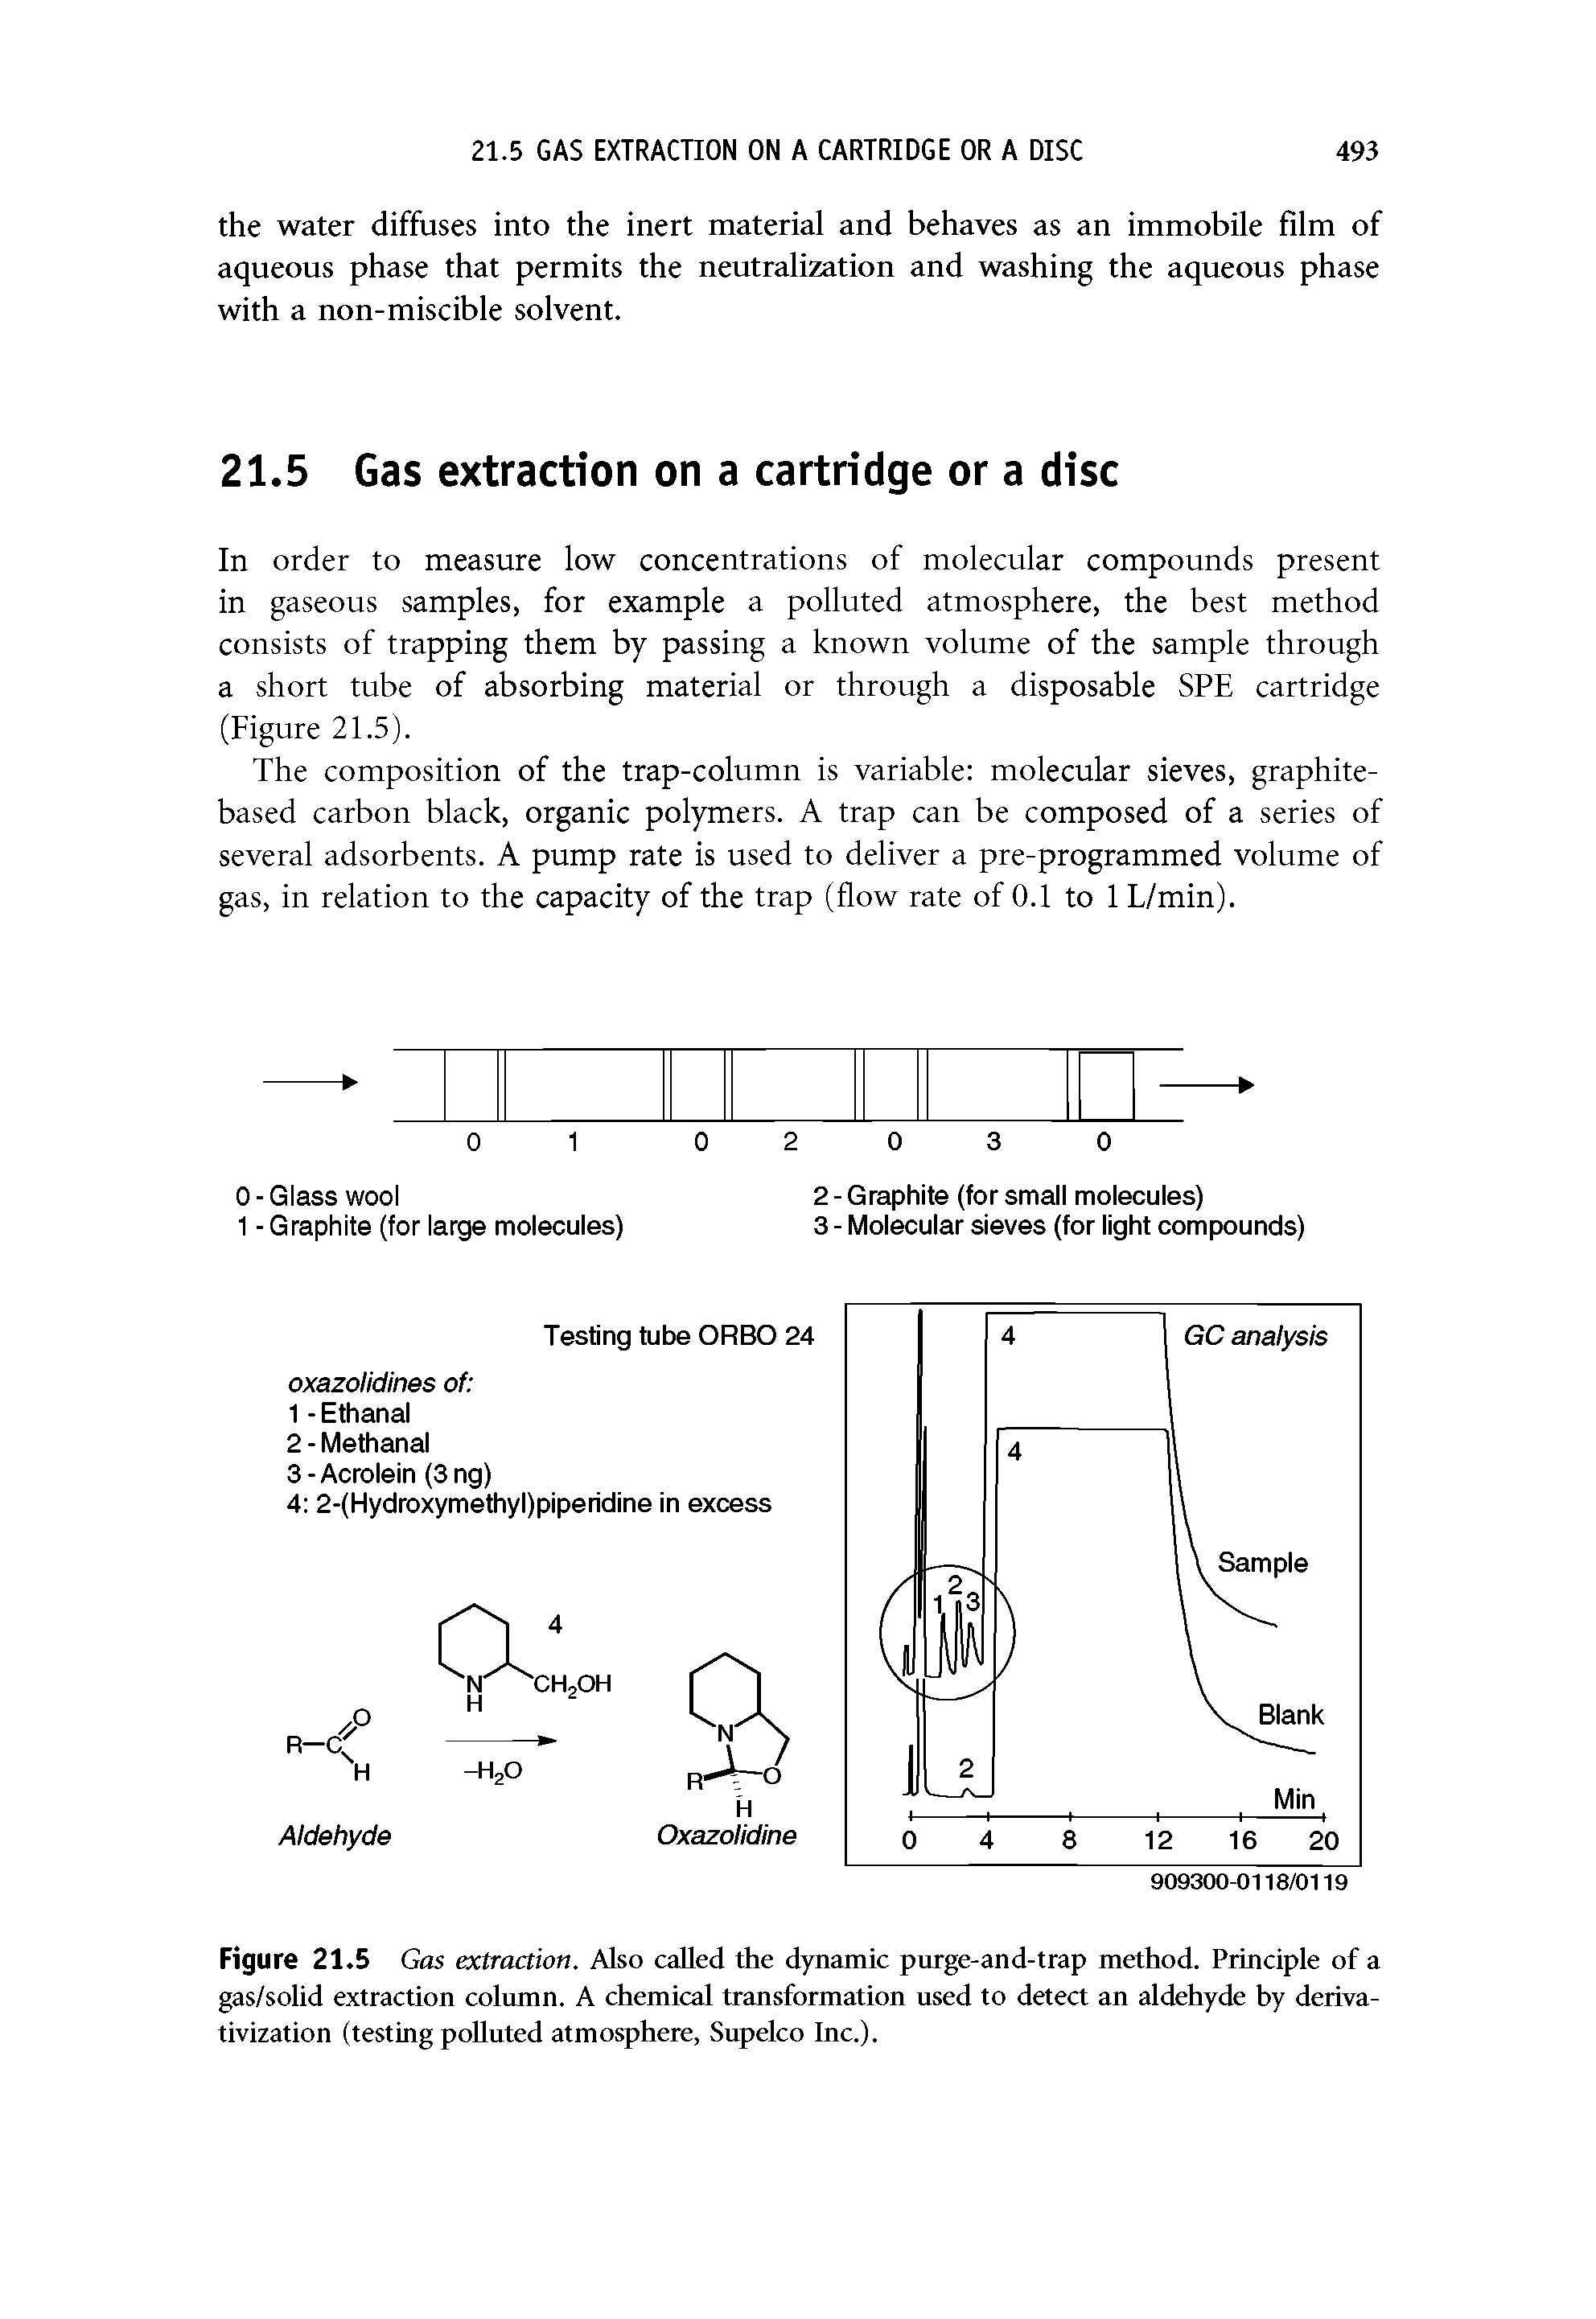 Figure 21.5 Gas extraction. Also called the dynamic purge-and-trap method. Principle of a gas/solid extraction column. A chemical transformation used to detect an aldehyde hy deriva-tivization (testing polluted atmosphere, Supelco Inc.).